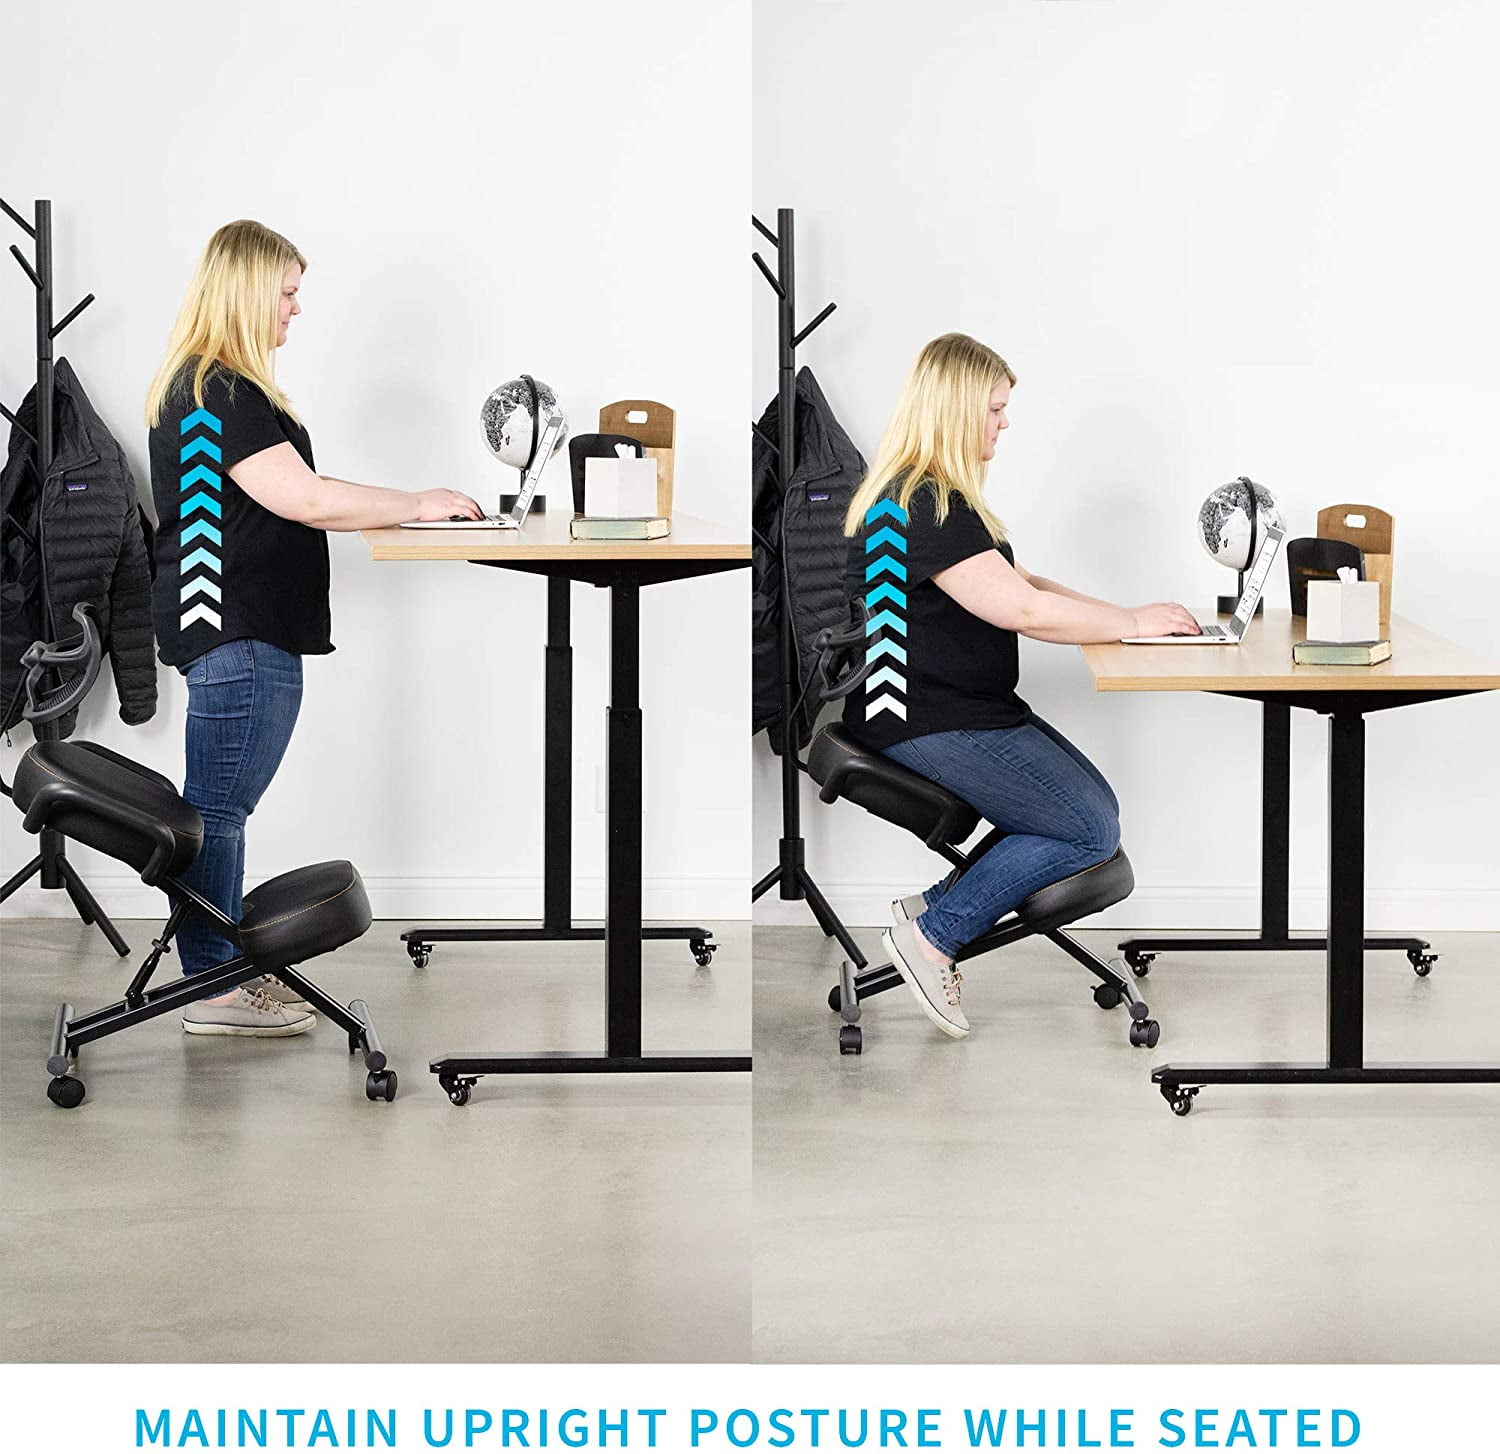 Ergonomic Kneeling Chair for Relieving Back Pain, Posture Correcting Knee Stool for Home Office Work Station - Black